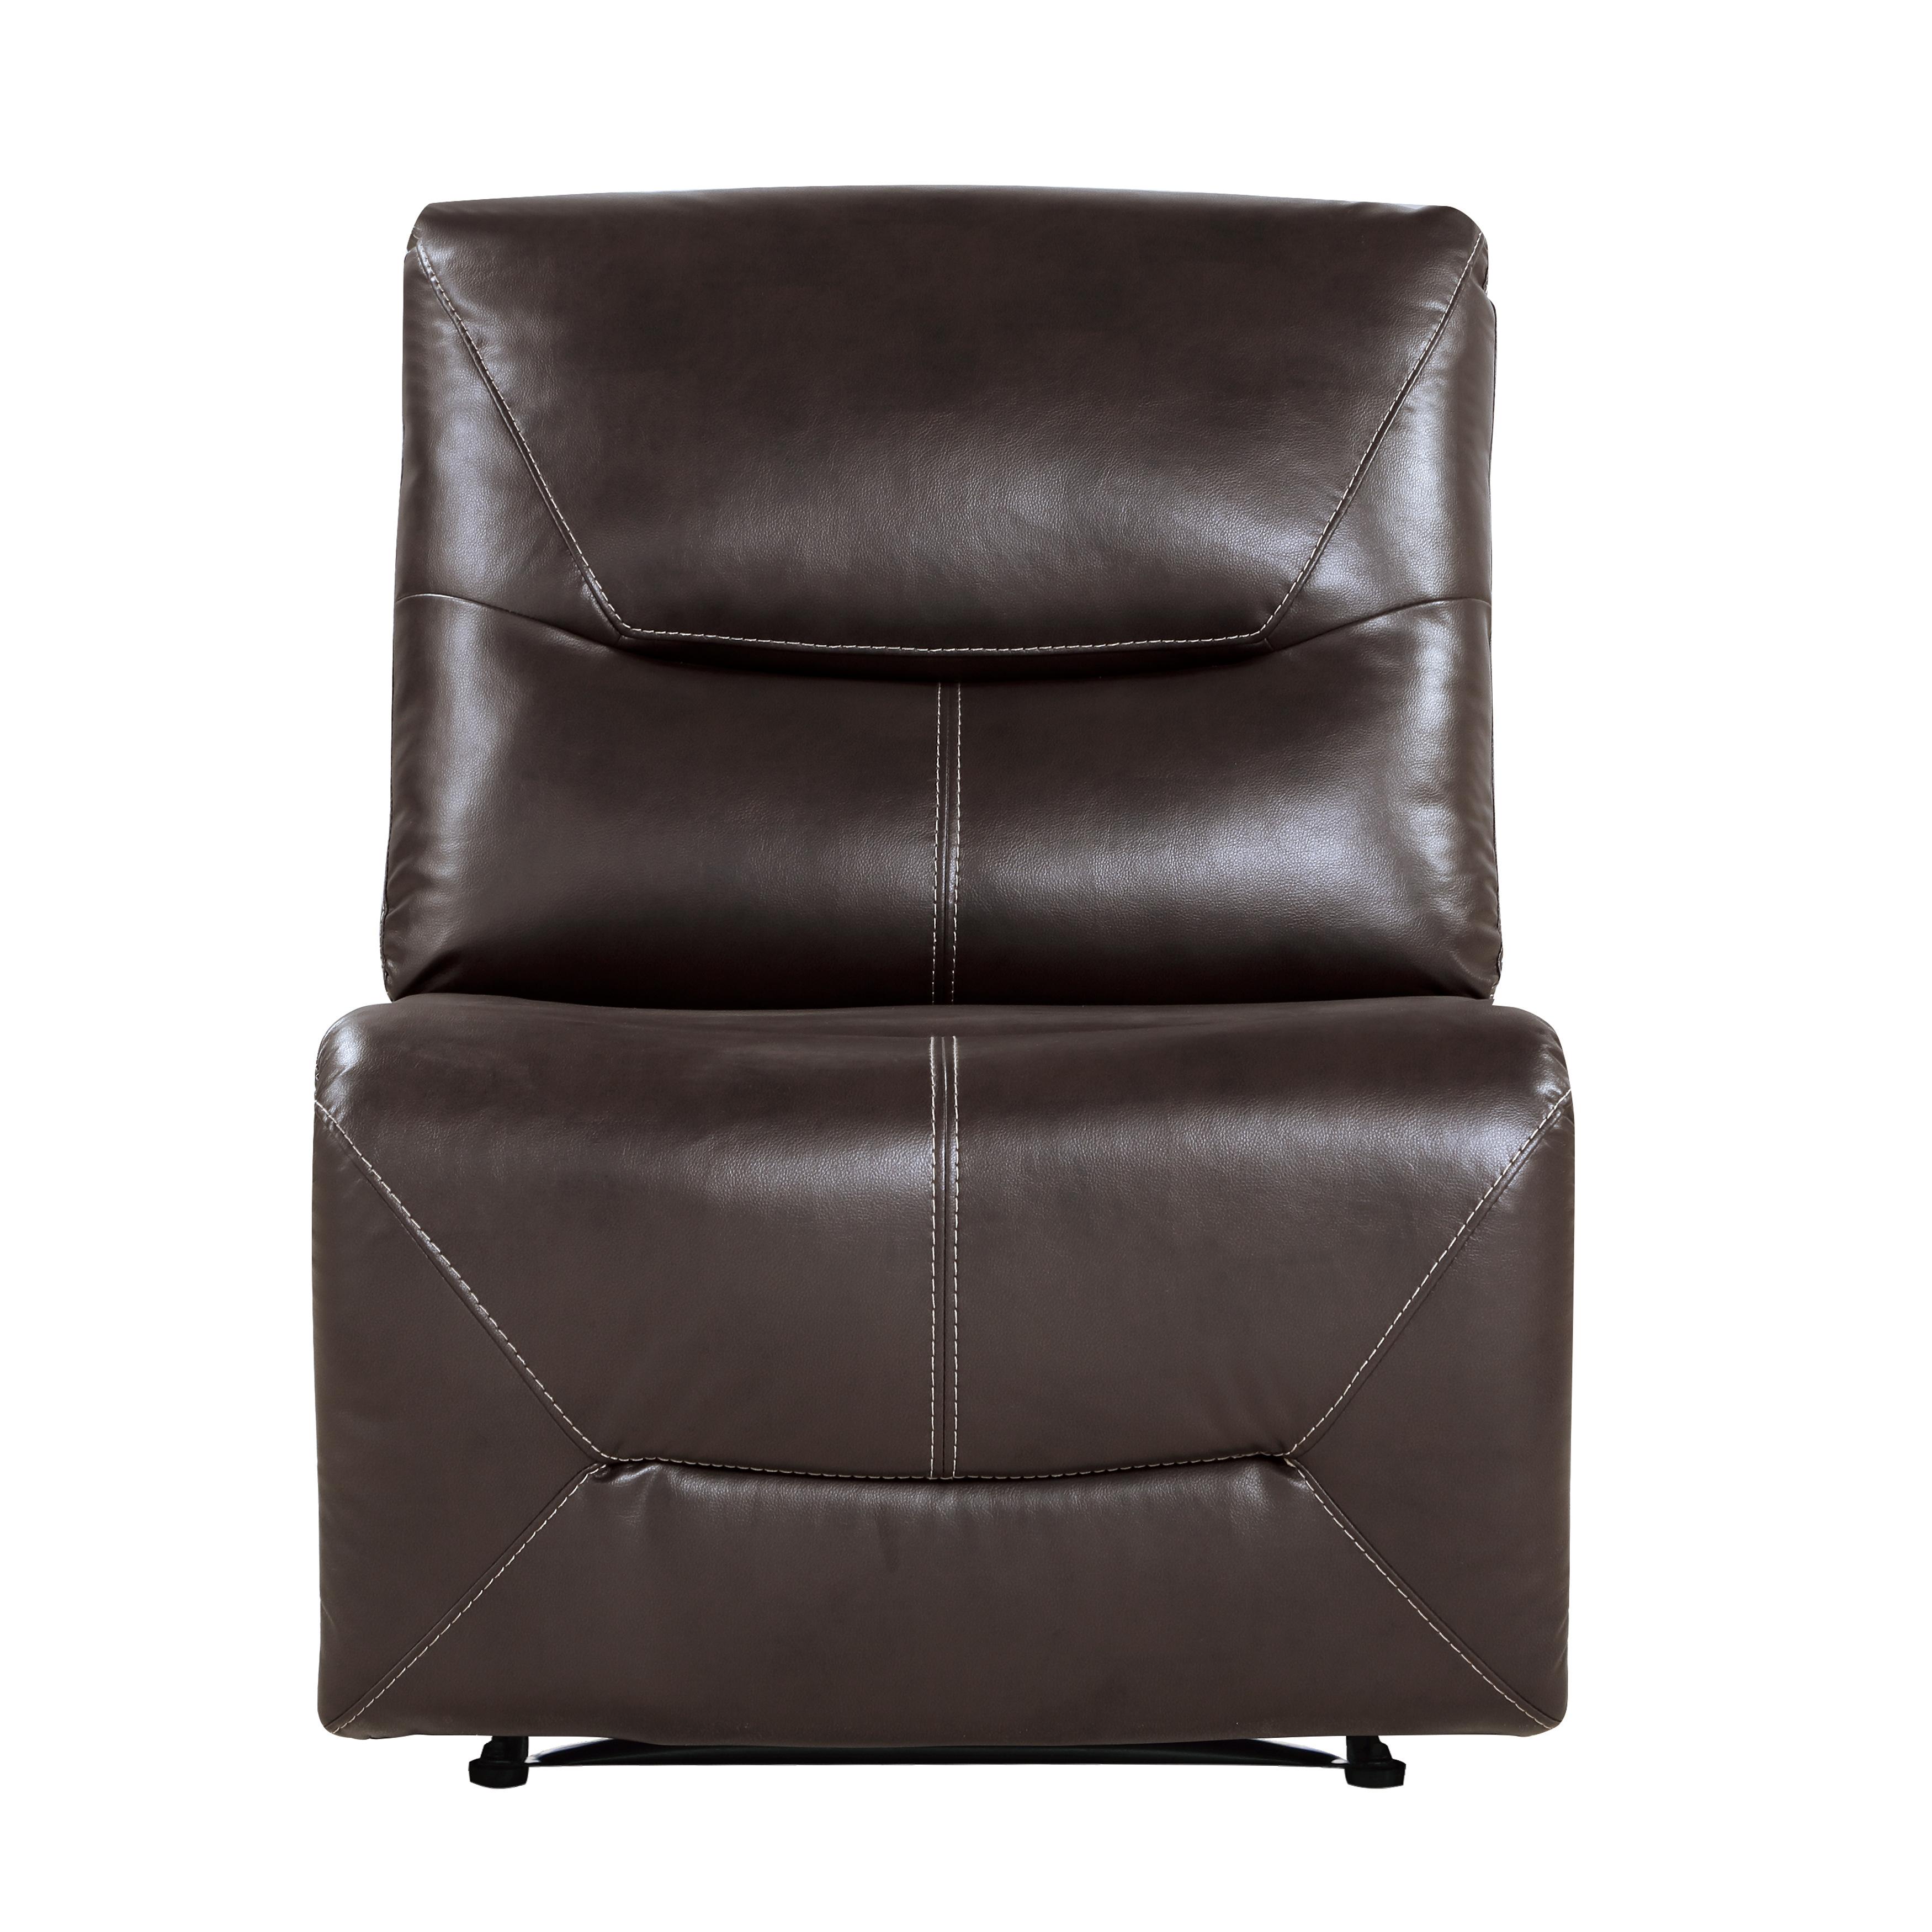 Transitional Power Armless Reclining Chair 9579BRW-ARPW Dyersburg 9579BRW-ARPW in Brown Faux Leather